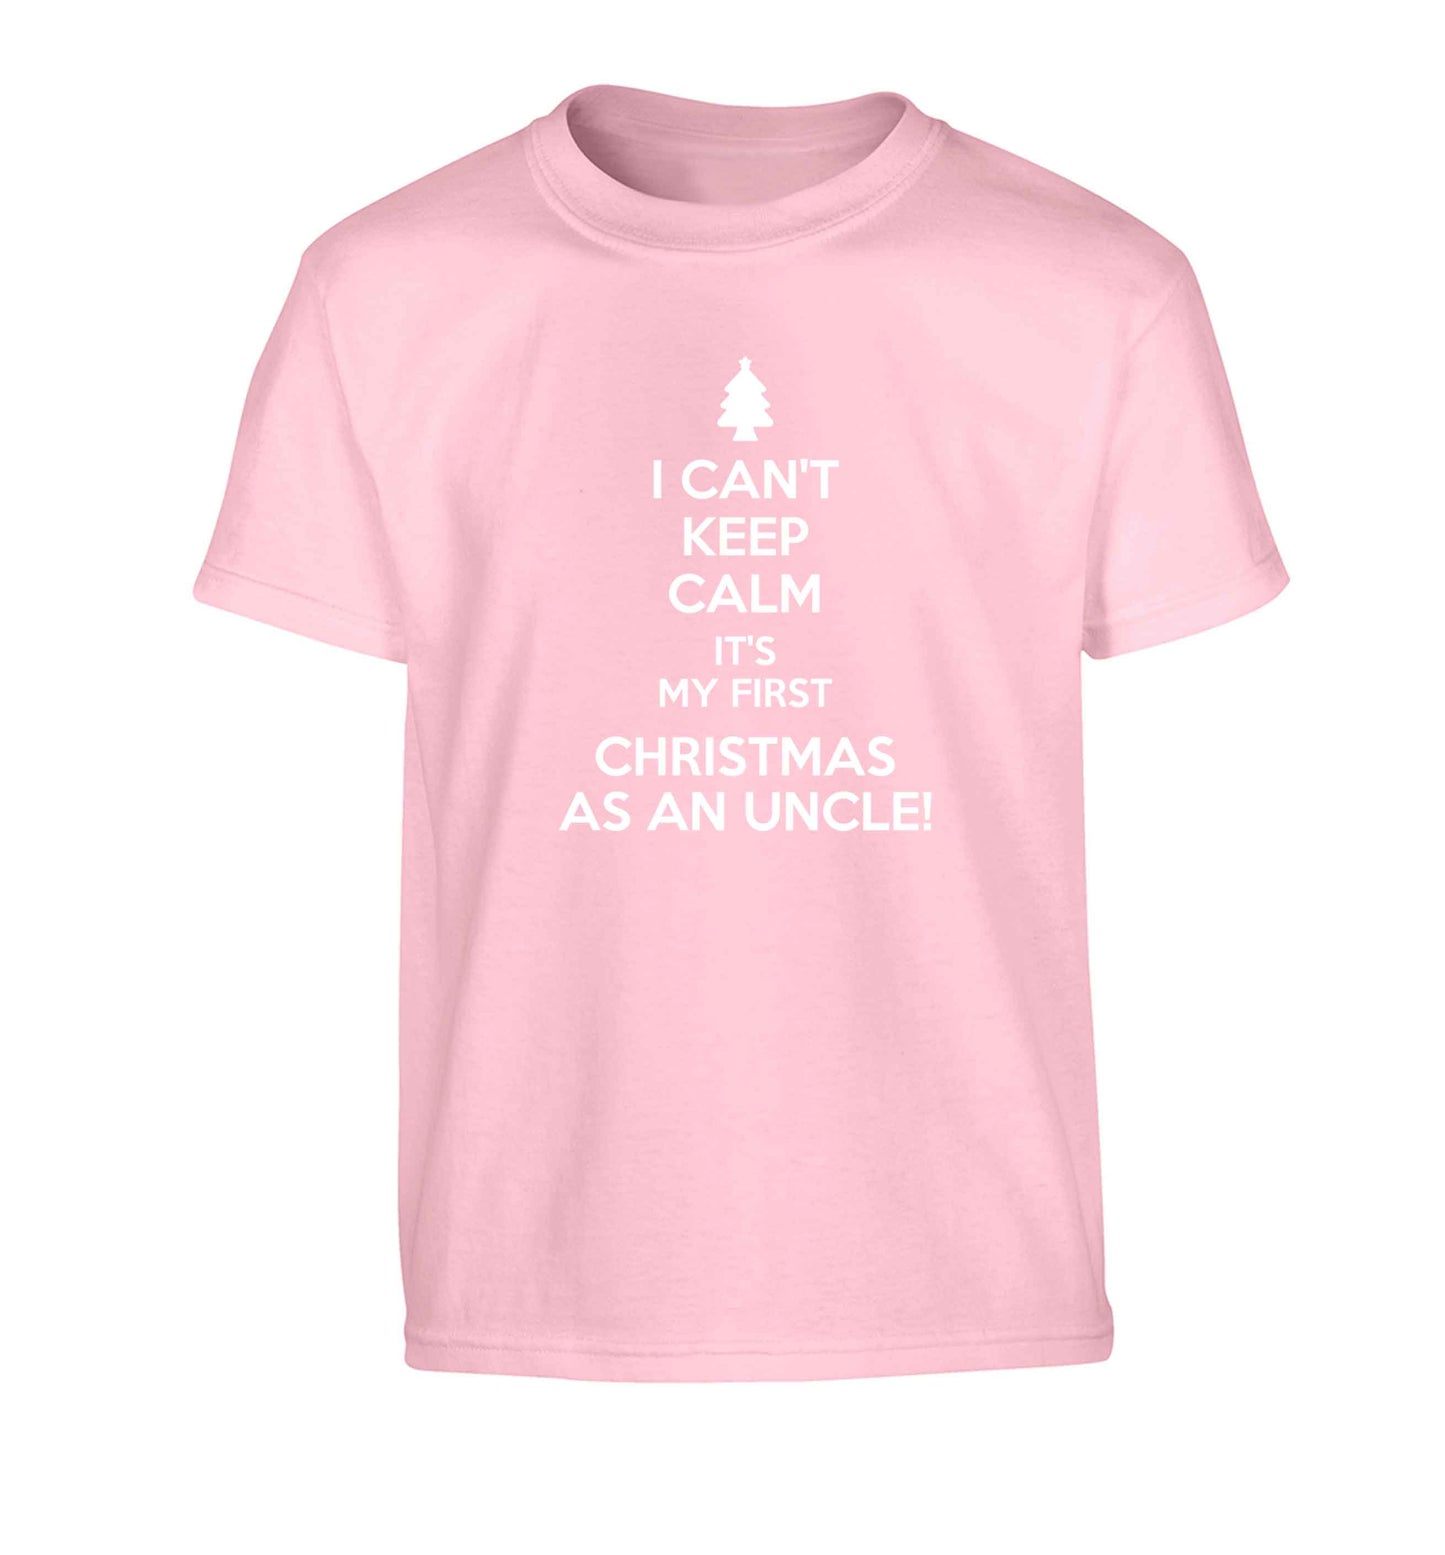 I can't keep calm it's my first Christmas as an uncle! Children's light pink Tshirt 12-13 Years